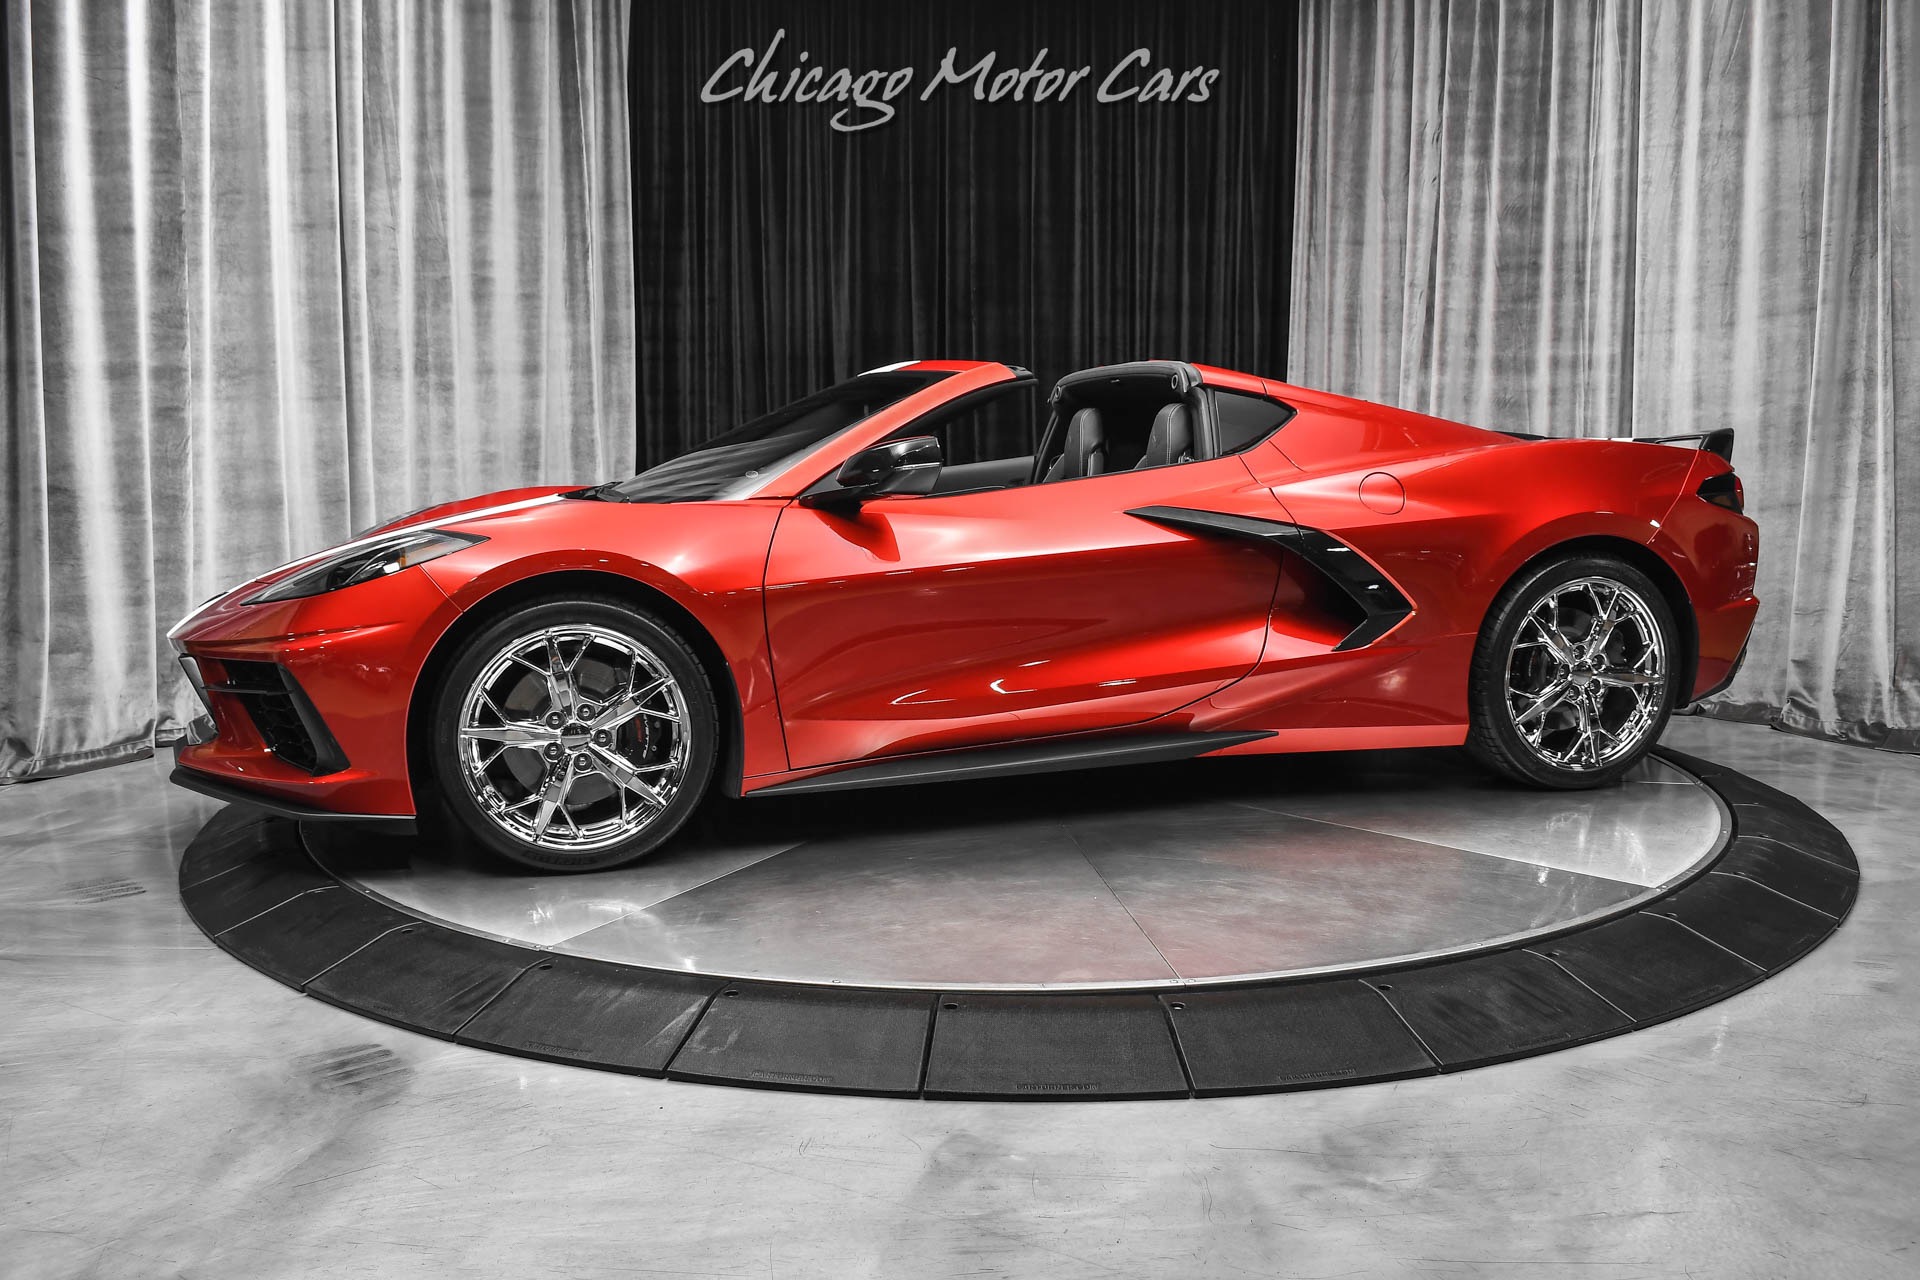 Used-2021-Chevrolet-Corvette-Stingray-2LT-Coupe-with-Z51-HOT-Spec-Front-Lift-LOW-Miles-LOADED